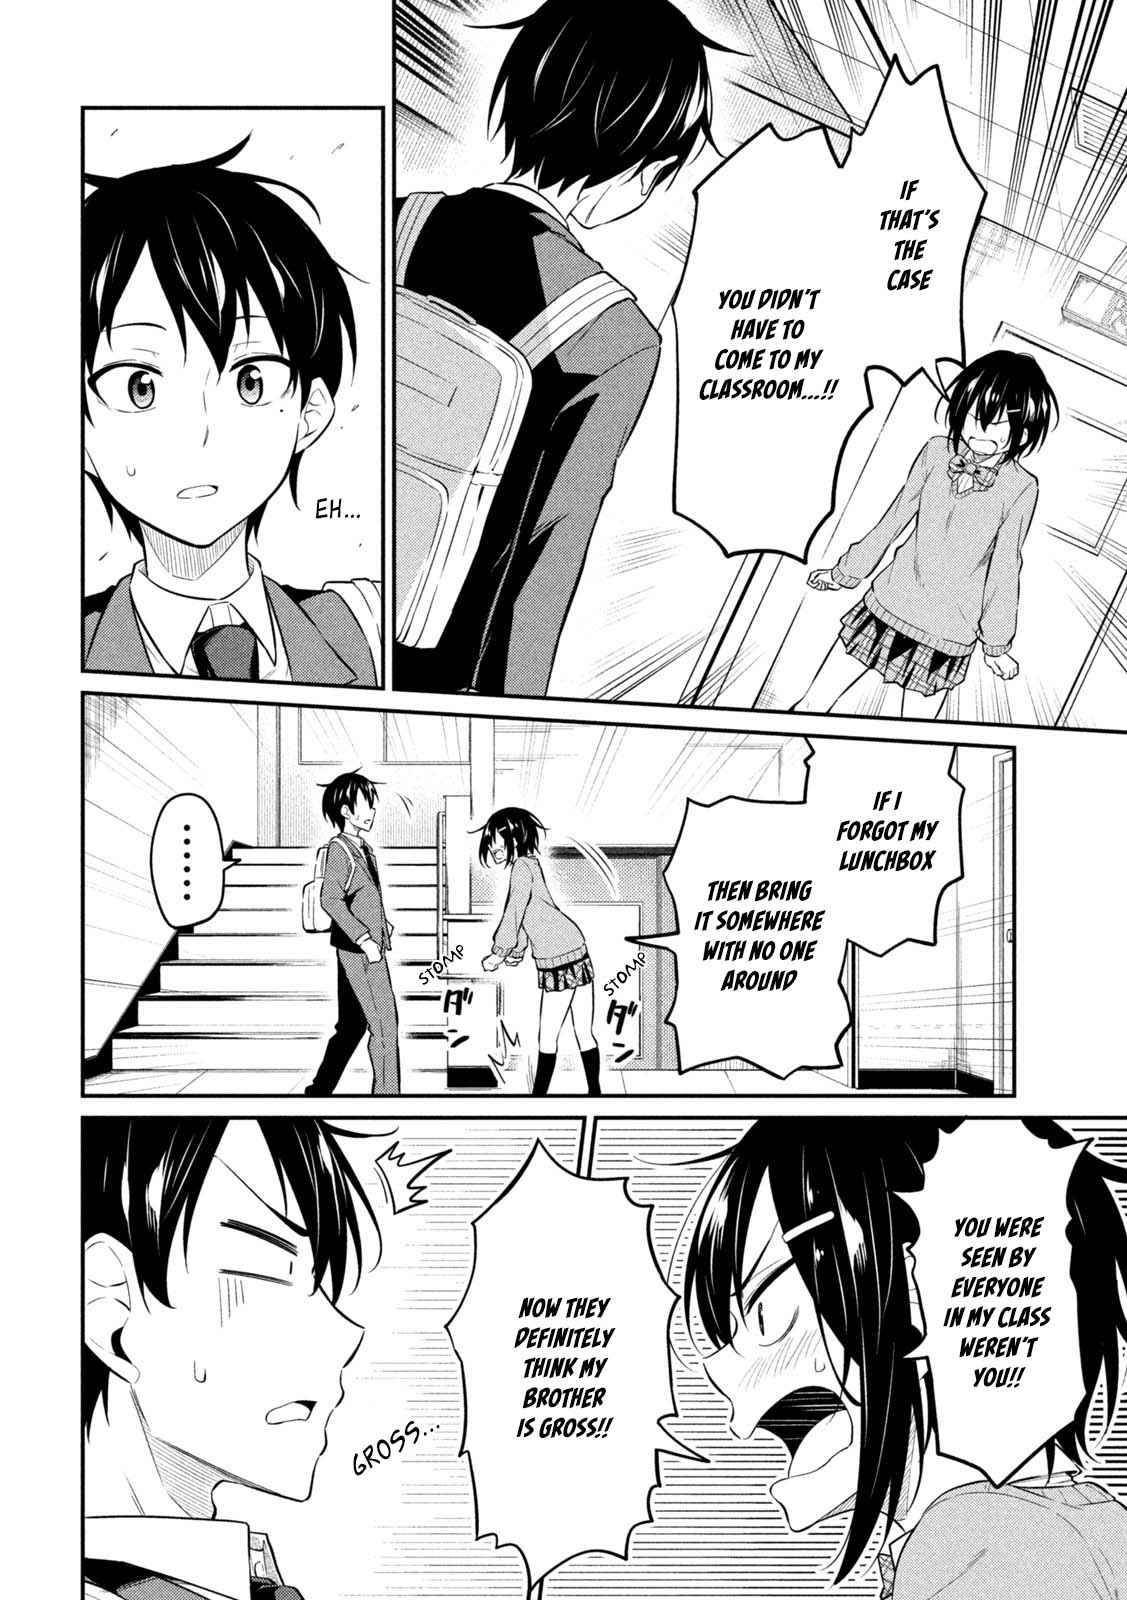 Home Cabaret ~Operation: Making a Cabaret Club at Home so Nii-chan Can Get Used to Girls - chapter 3 - #5